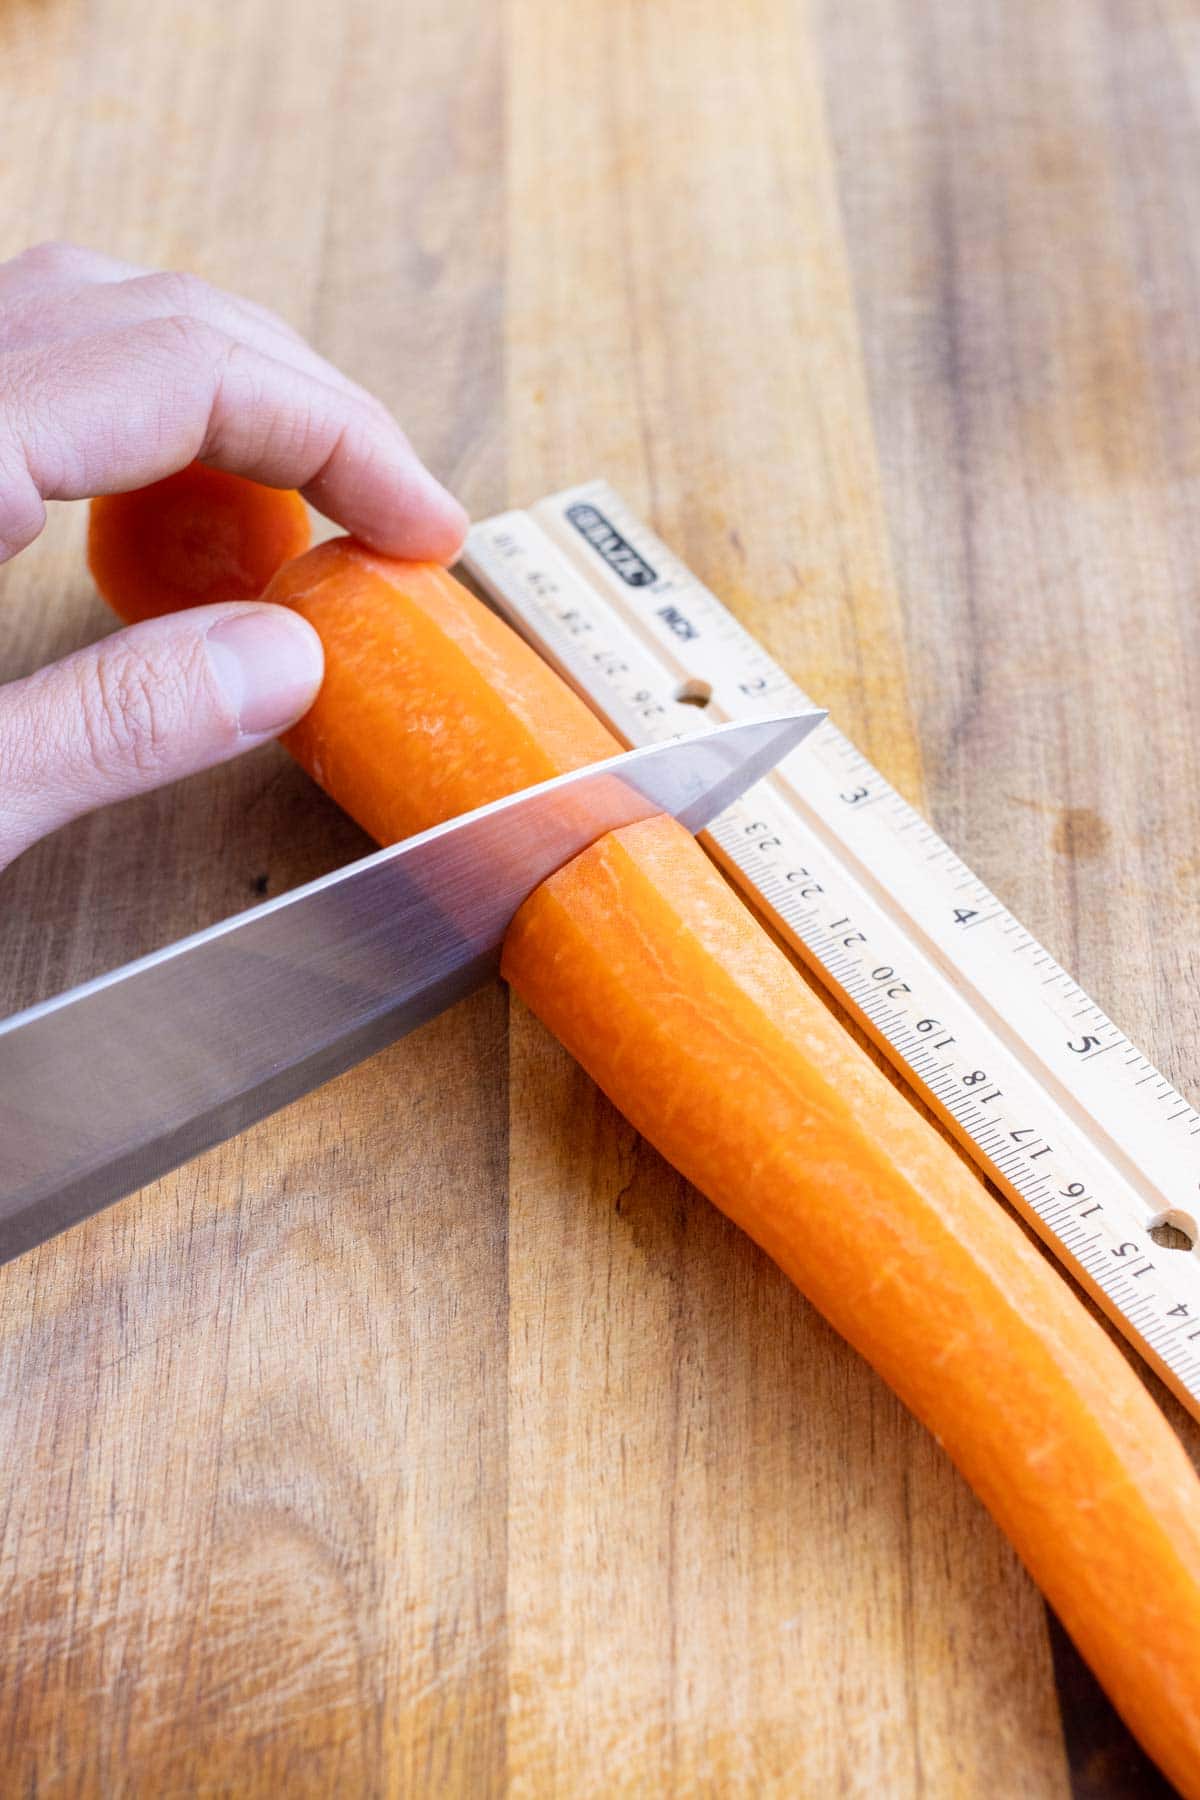 The peeled carrot is measured and cut into smaller sections.